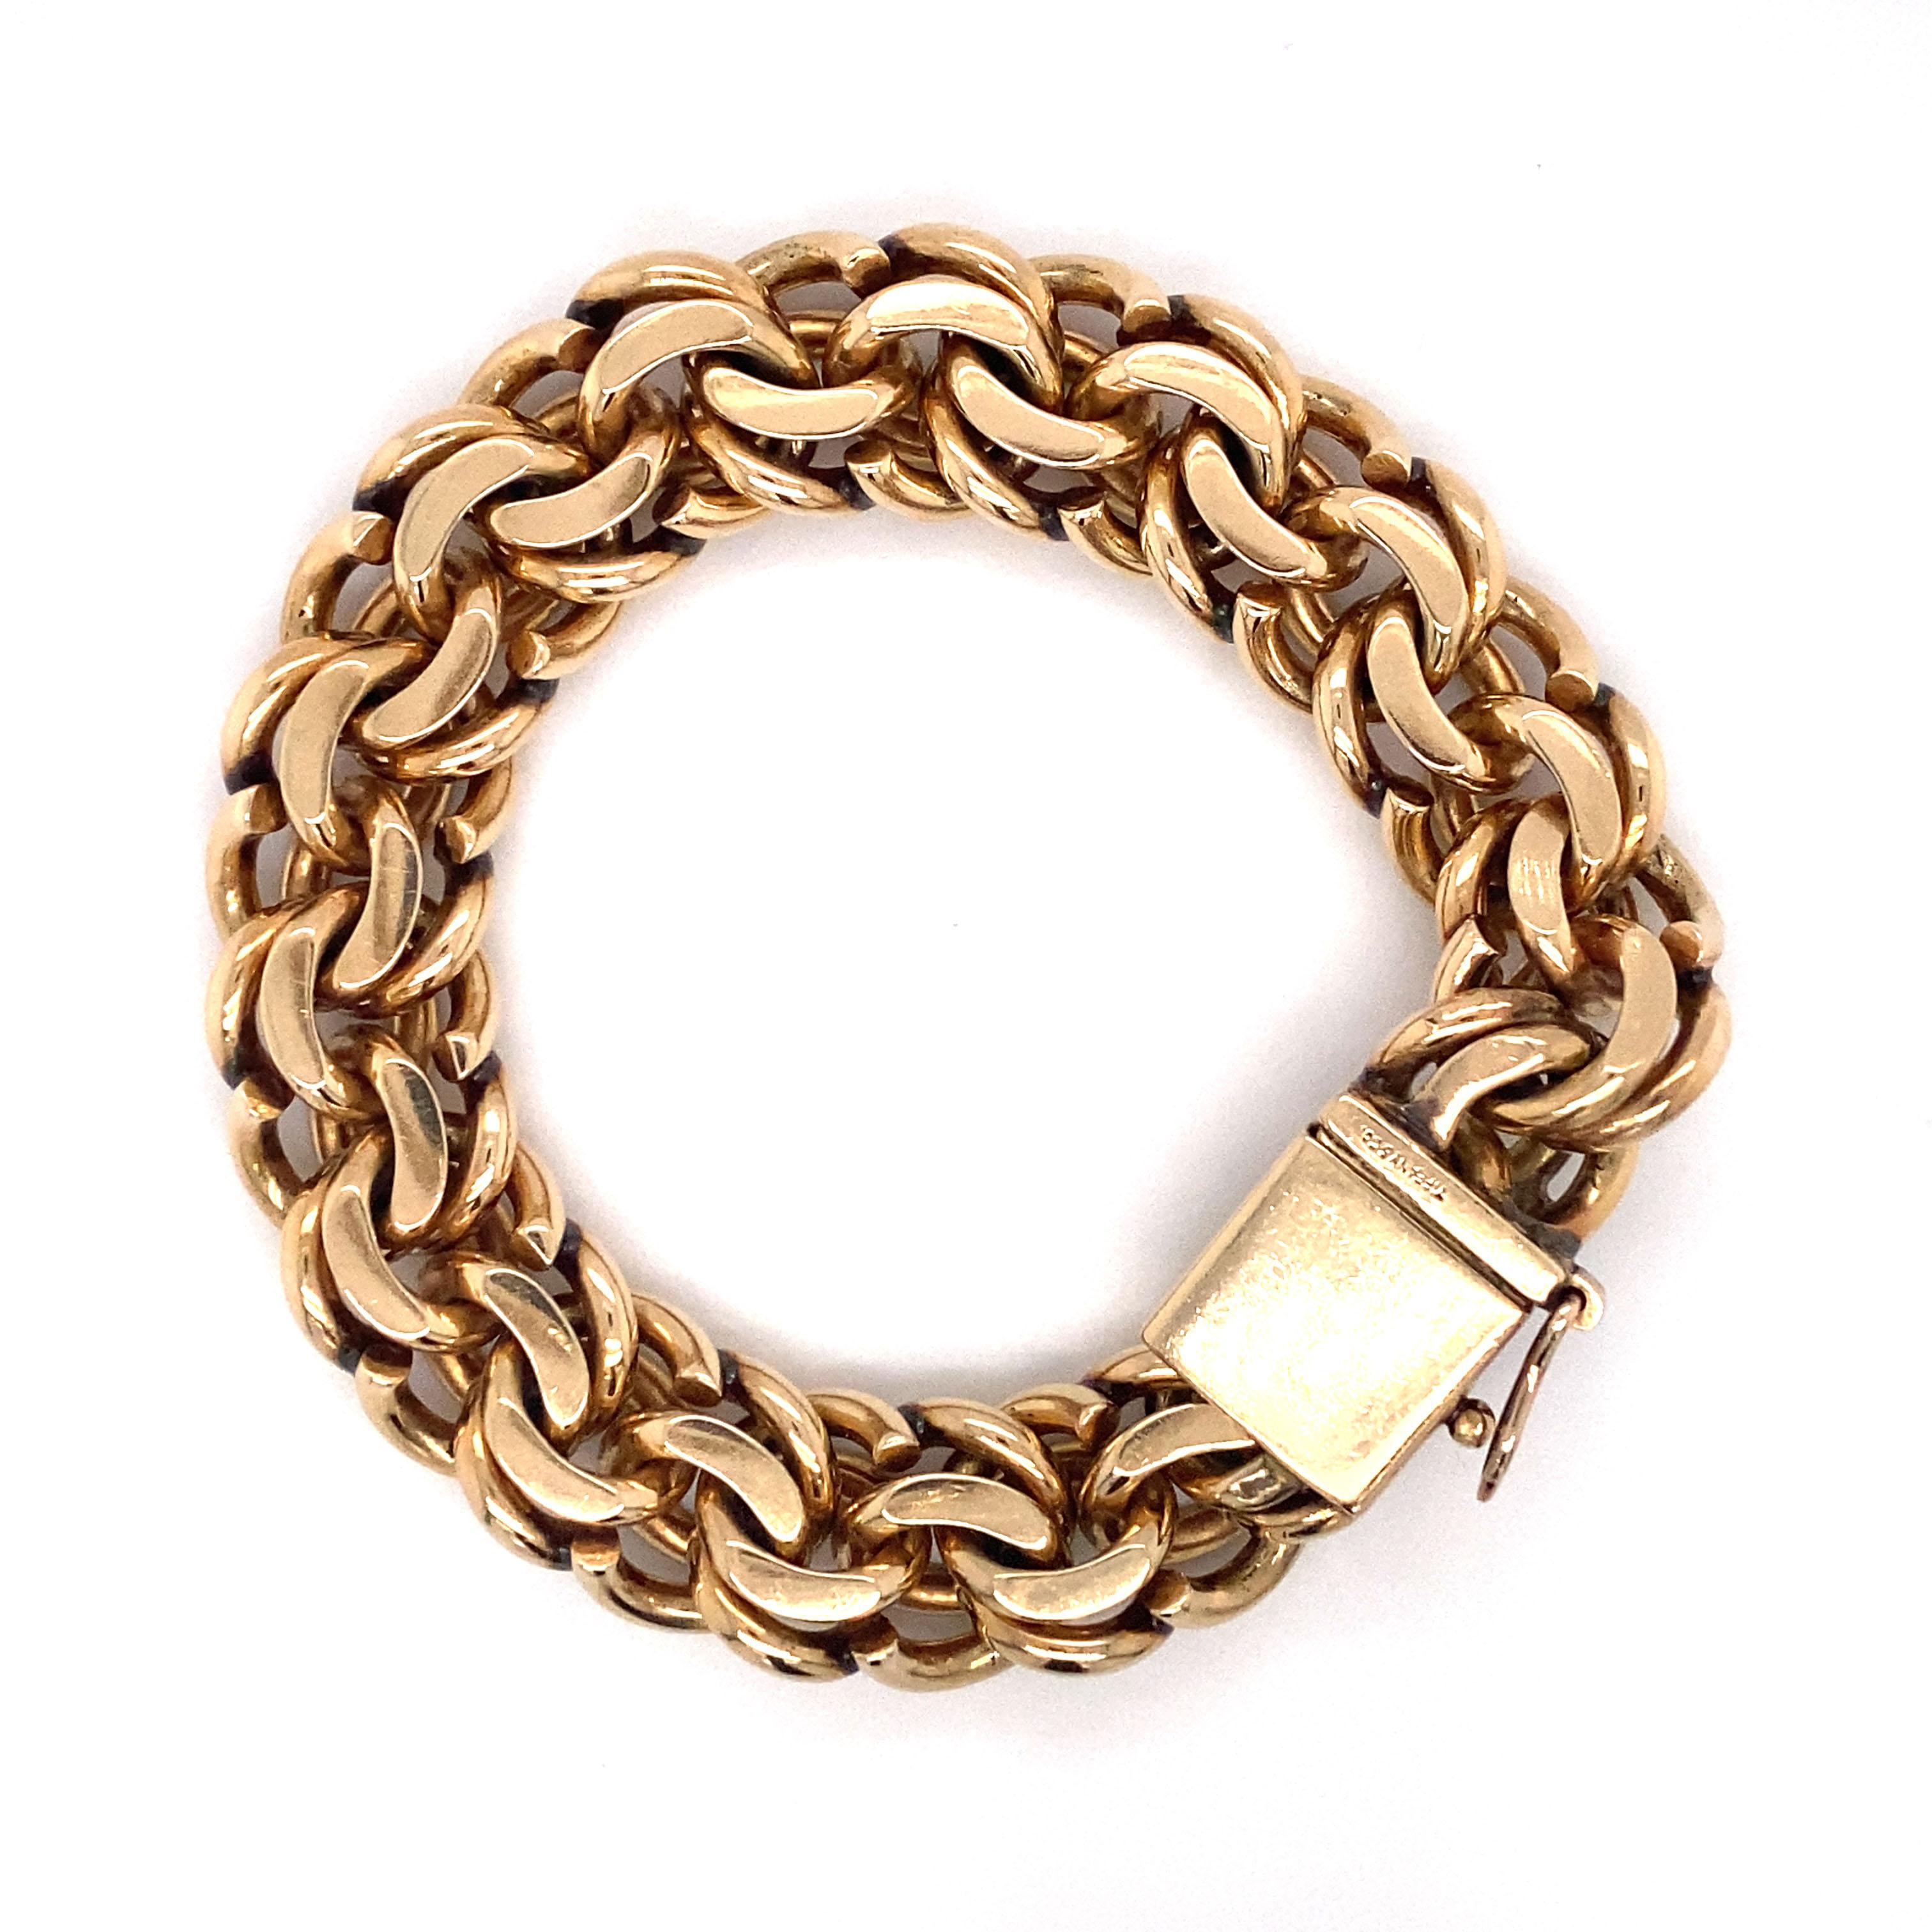 Circa: 1970s
Metal Type: 14 Karat Yellow Gold 
Weight: 83.8 grams
Dimensions: 7 inch Length x 0.5 inch Width